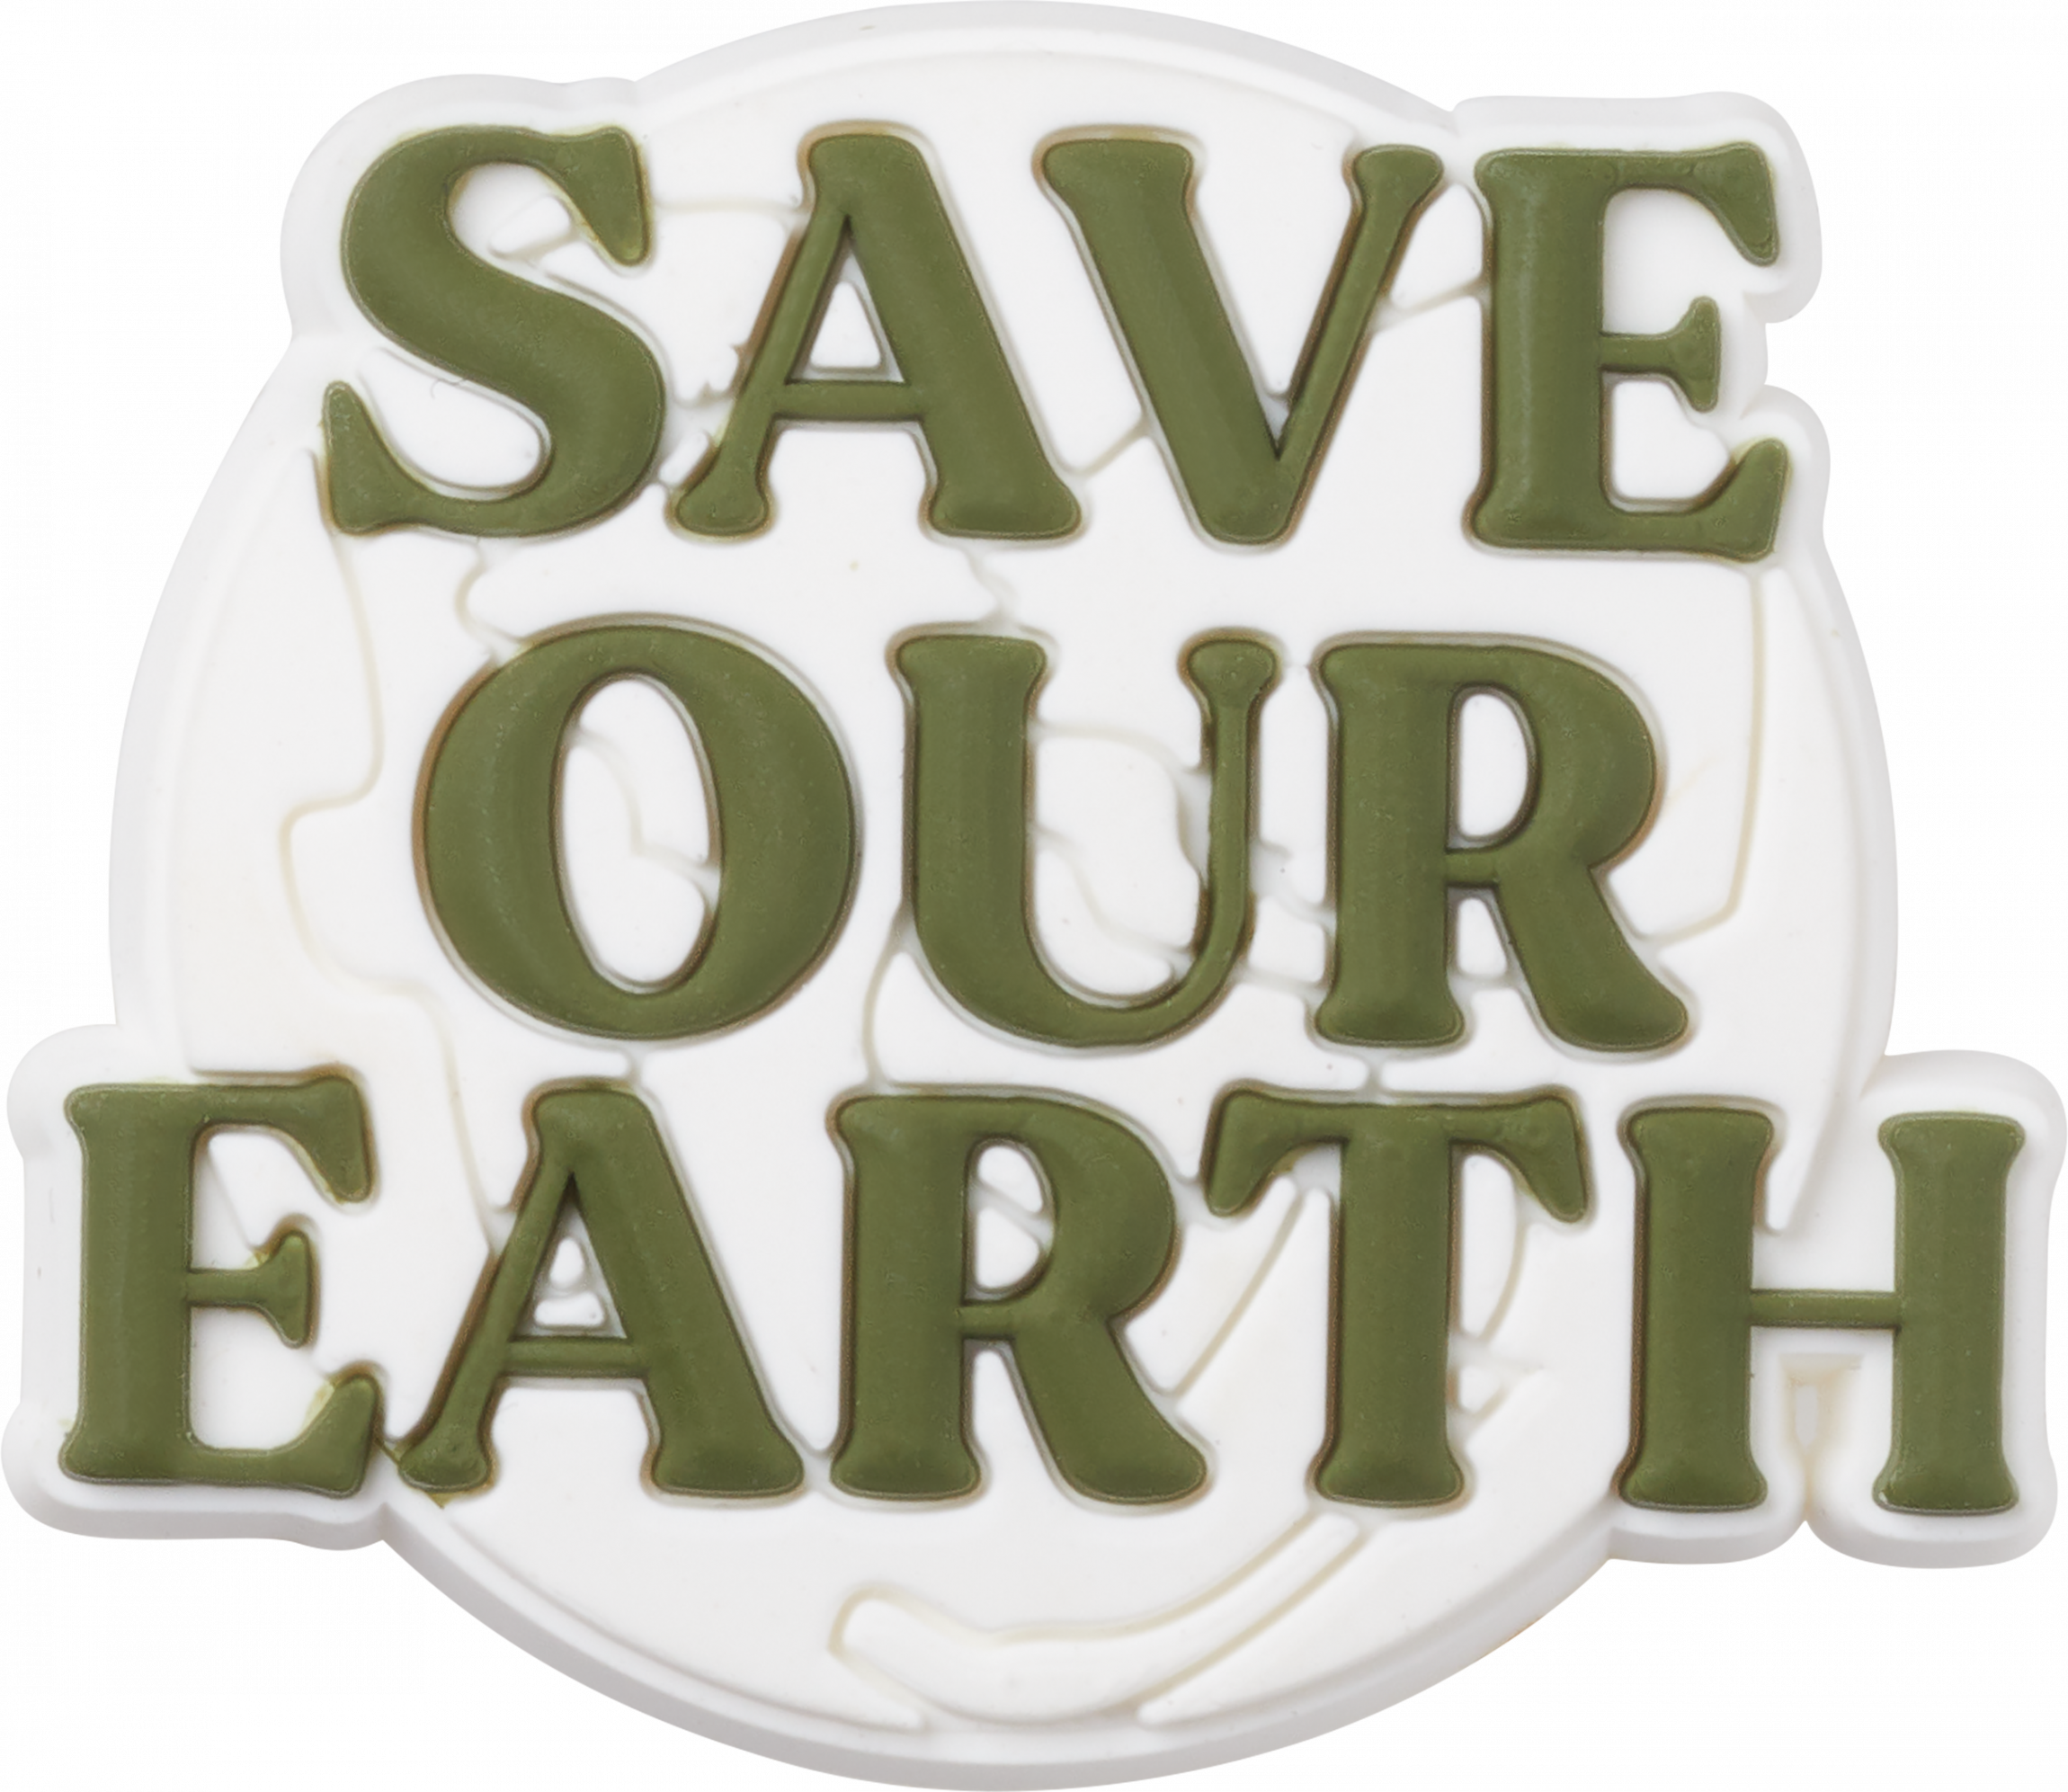 Save Our Earth